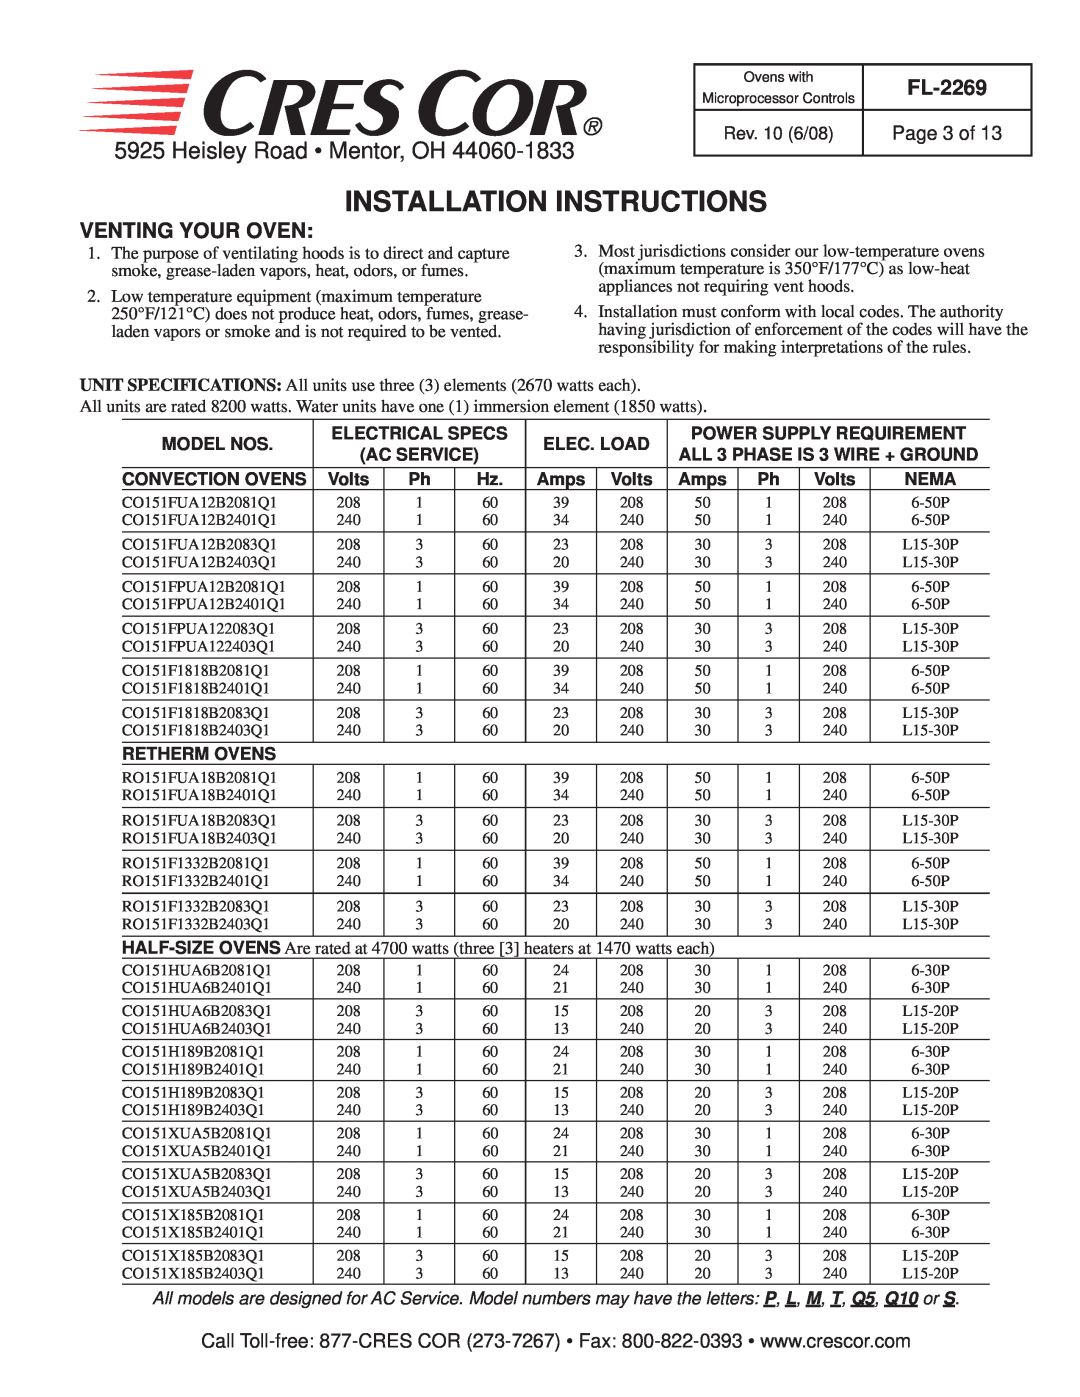 Cres Cor RO151F1332B-Q1 Installation Instructions, Heisley Road Mentor, OH, FL-2269, Venting Your Oven, Page 3 of, Volts 